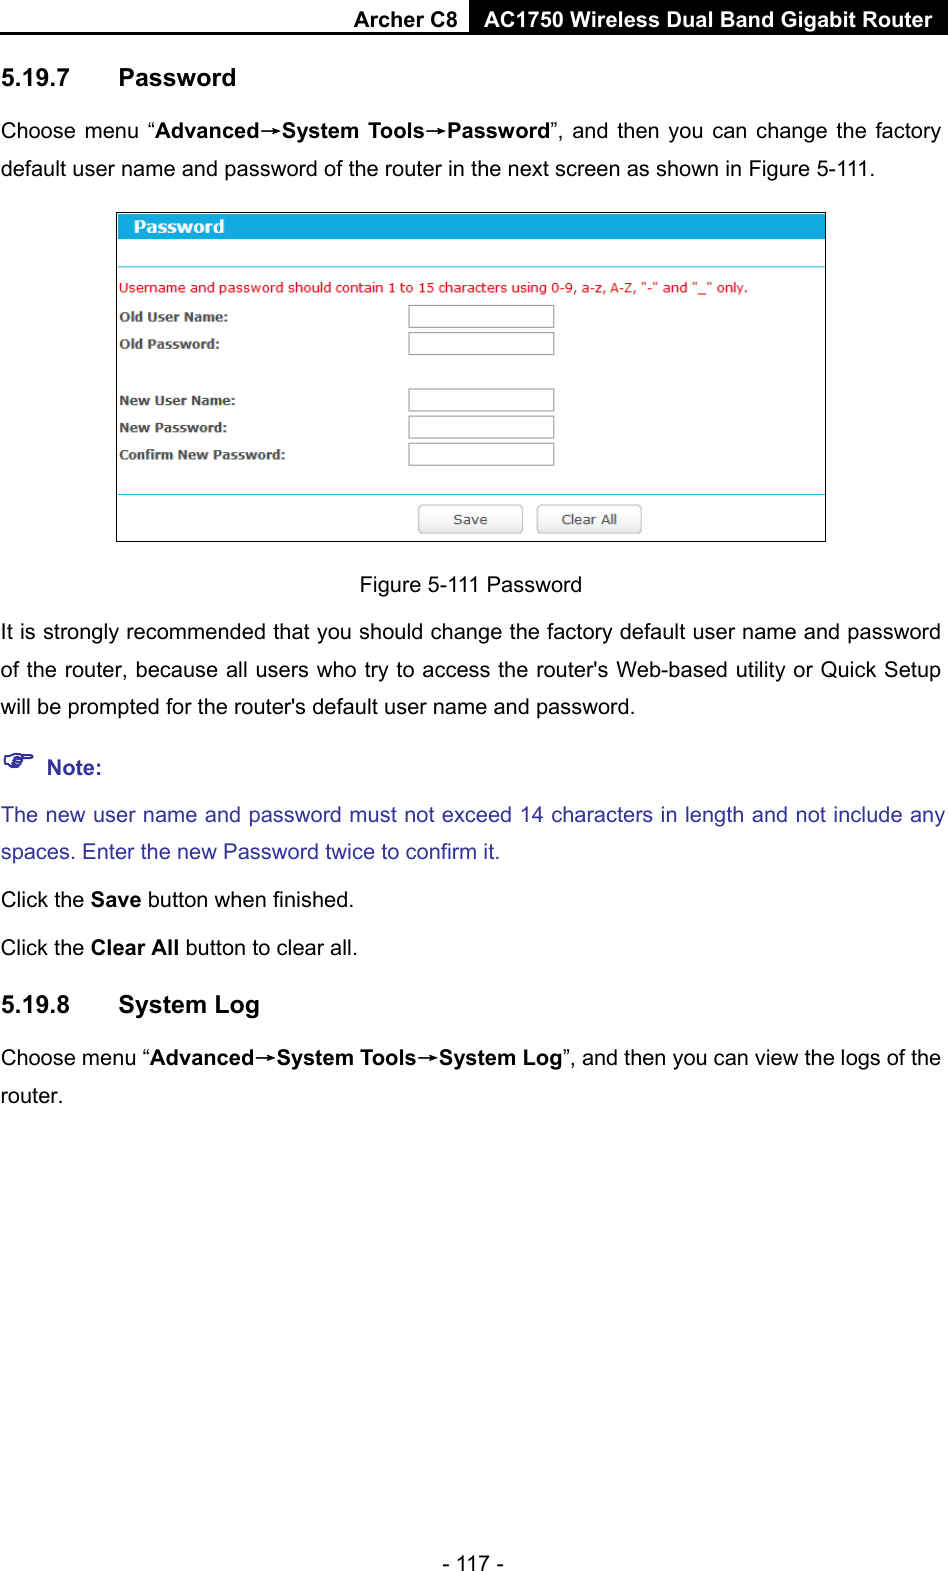 Archer C8 AC1750 Wireless Dual Band Gigabit Router  - 117 - 5.19.7 Password Choose menu “Advanced→System Tools→Password”, and then you can change the factory default user name and password of the router in the next screen as shown in Figure 5-111.  Figure 5-111 Password It is strongly recommended that you should change the factory default user name and password of the router, because all users who try to access the router&apos;s Web-based utility or Quick Setup will be prompted for the router&apos;s default user name and password.  Note: The new user name and password must not exceed 14 characters in length and not include any spaces. Enter the new Password twice to confirm it. Click the Save button when finished. Click the Clear All button to clear all. 5.19.8 System Log Choose menu “Advanced→System Tools→System Log”, and then you can view the logs of the router. 